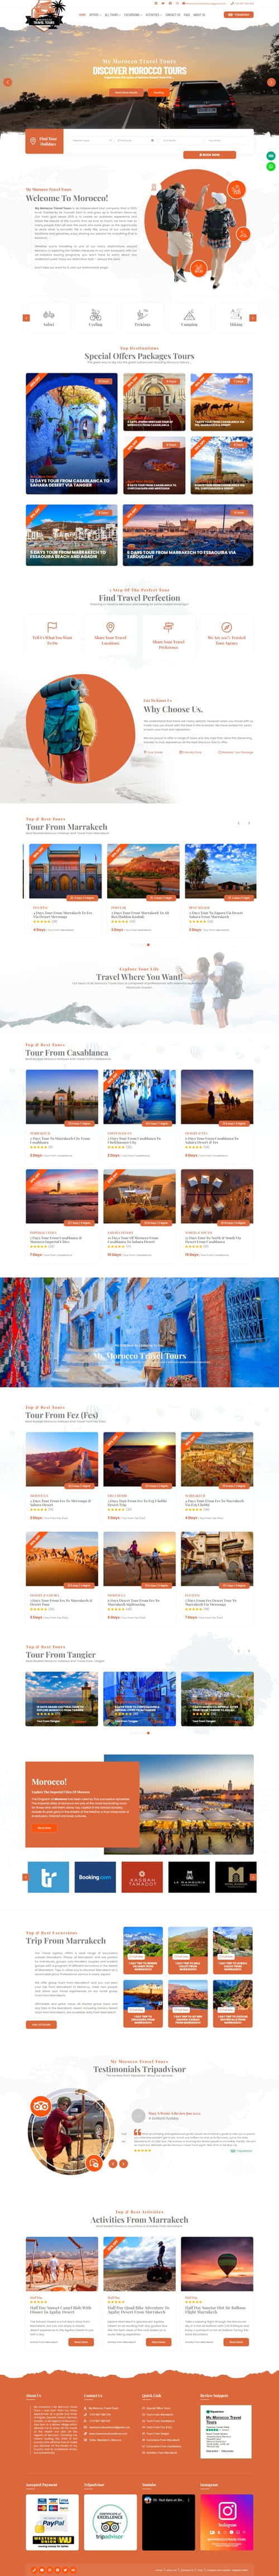 My Morocco Travel Tours